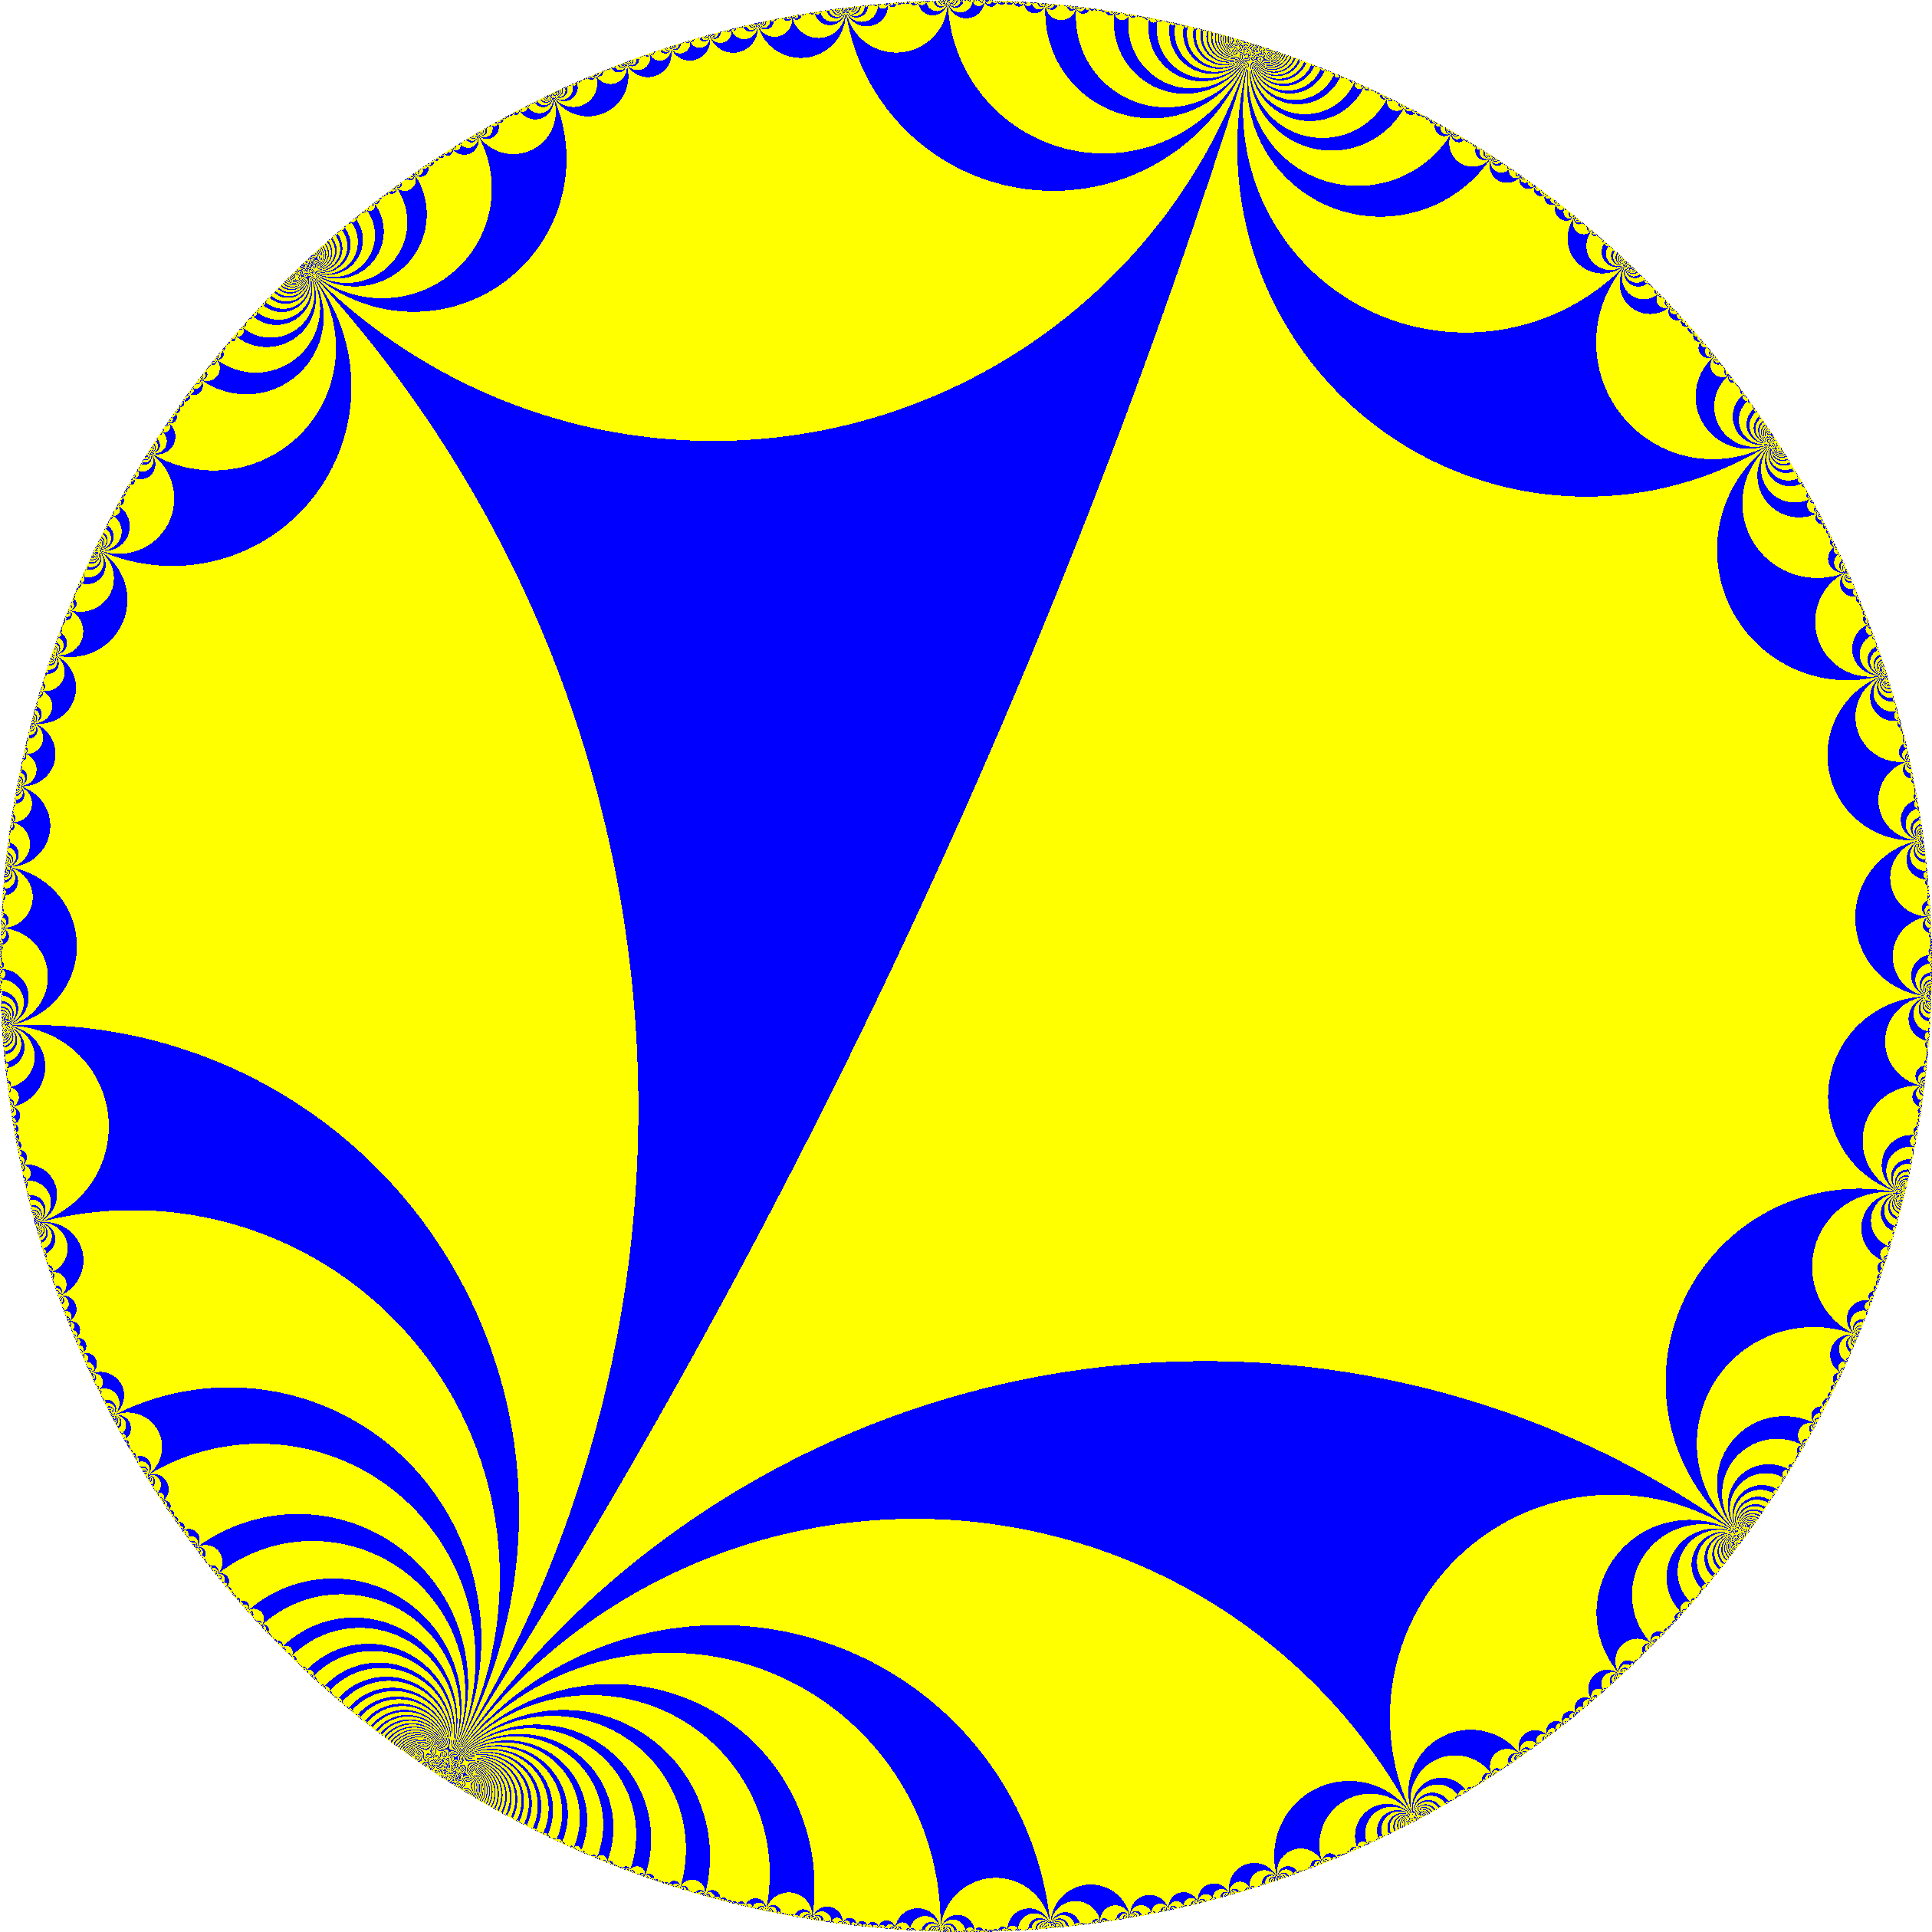 https://upload.wikimedia.org/wikipedia/commons/d/d1/H2_tiling_38i-4.png